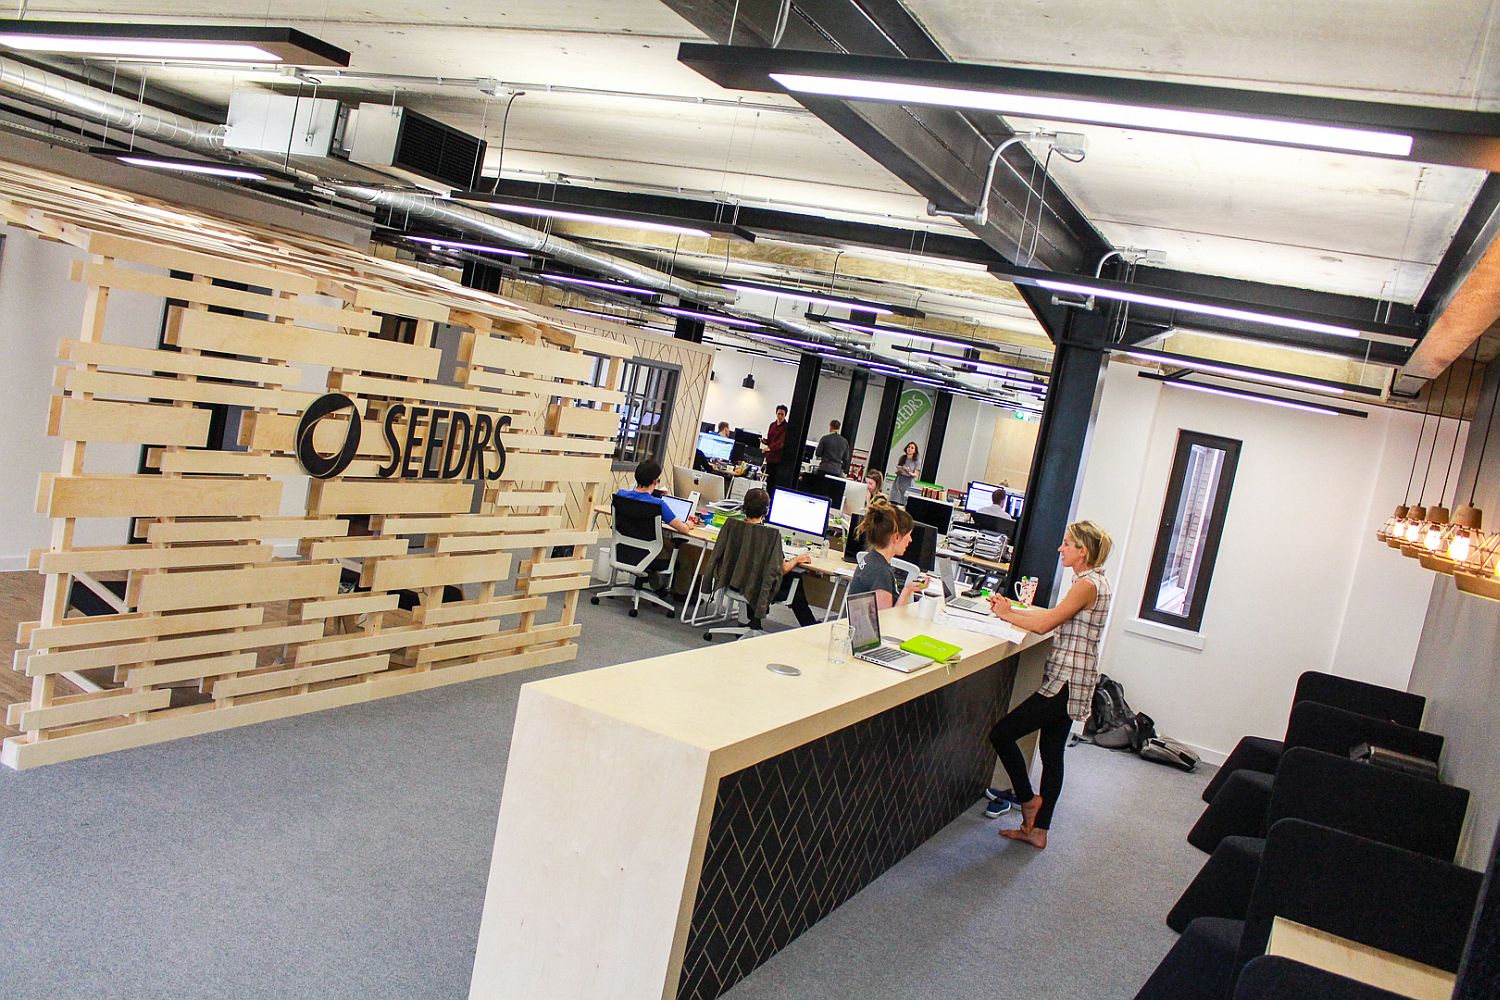 Scandinavian Style Wrapped in London Chram: Inspired Seedrs Headquarters